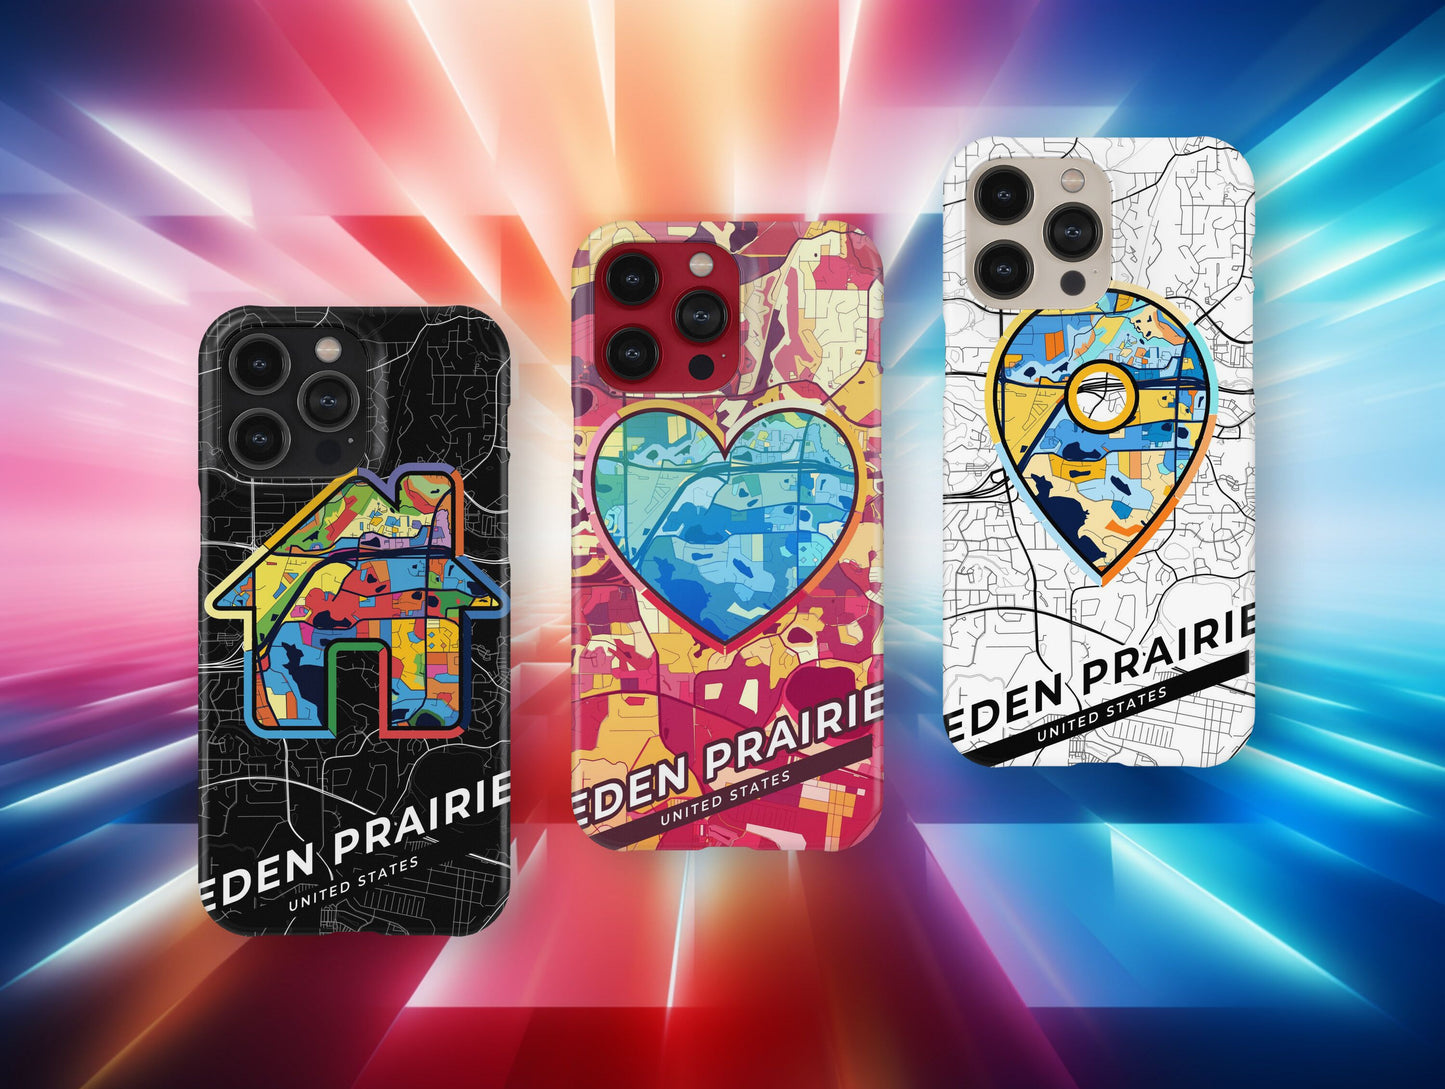 Eden Prairie Minnesota slim phone case with colorful icon. Birthday, wedding or housewarming gift. Couple match cases.